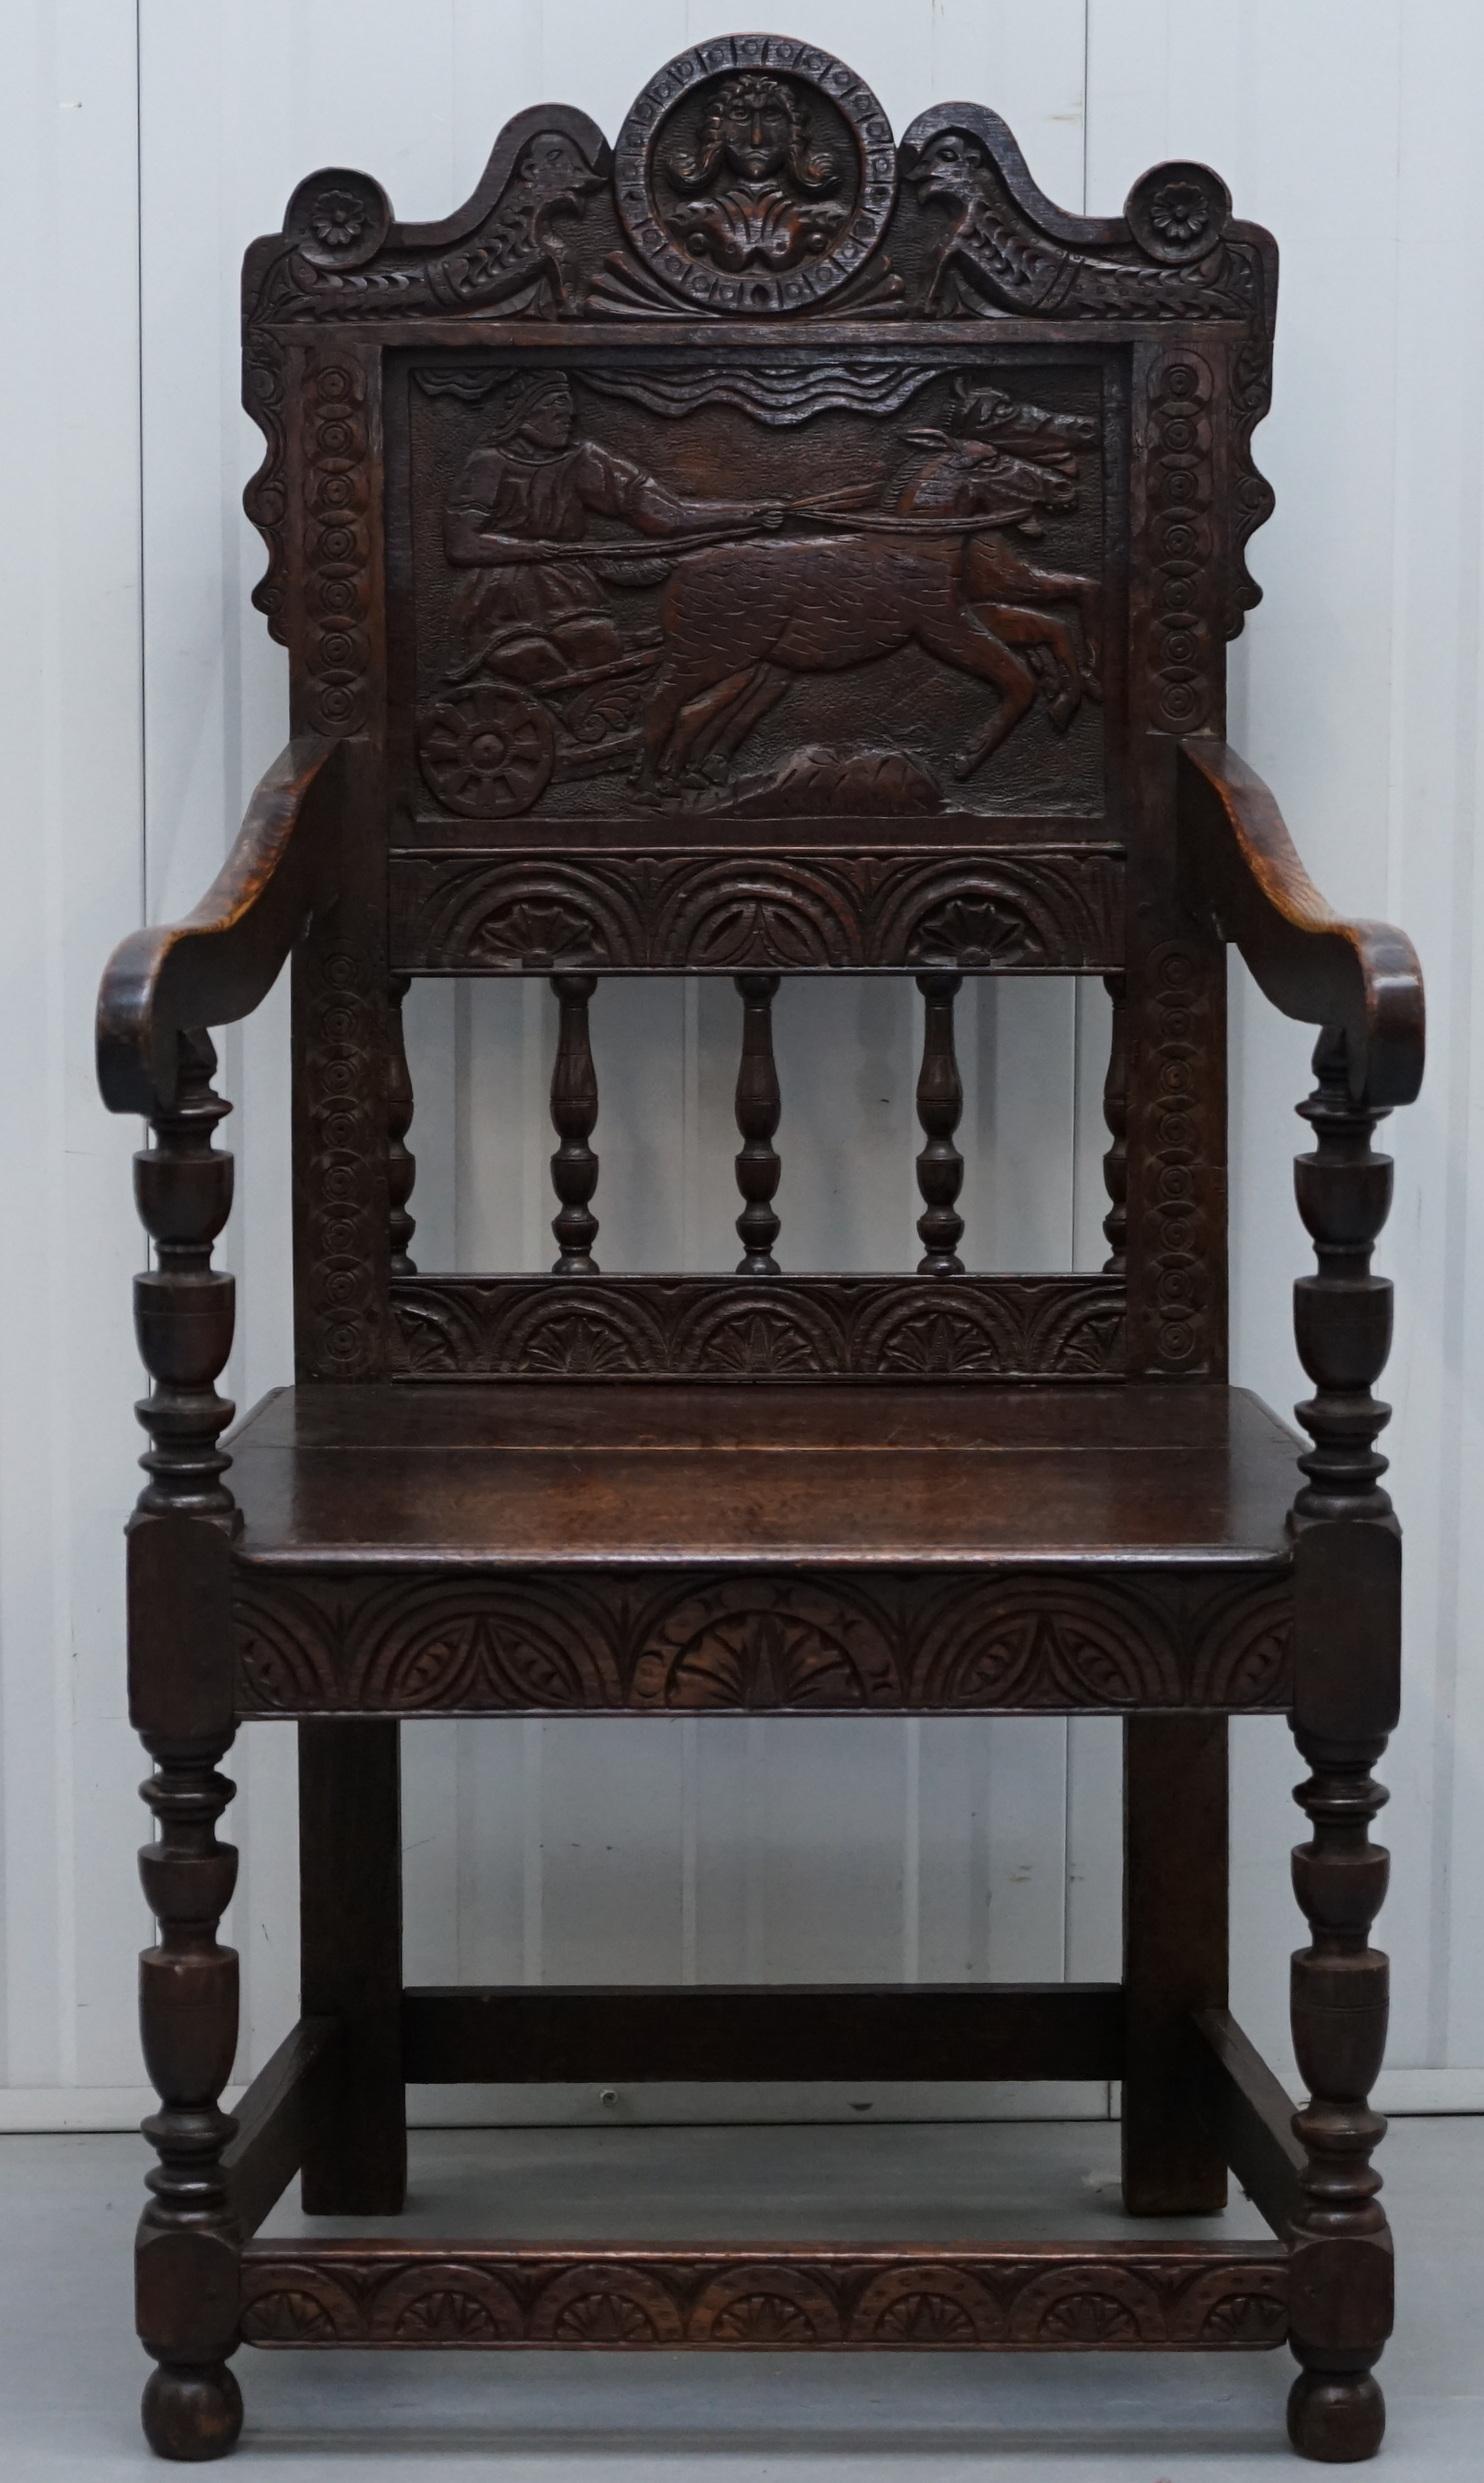 We are delighted to offer for sale this late 18th-century solid oak hand-carved Wainscot armchair with back panel depicting King Charles I in his chariot with horses

A very old piece, handmade with wood dowel nails throughout, the timber has a